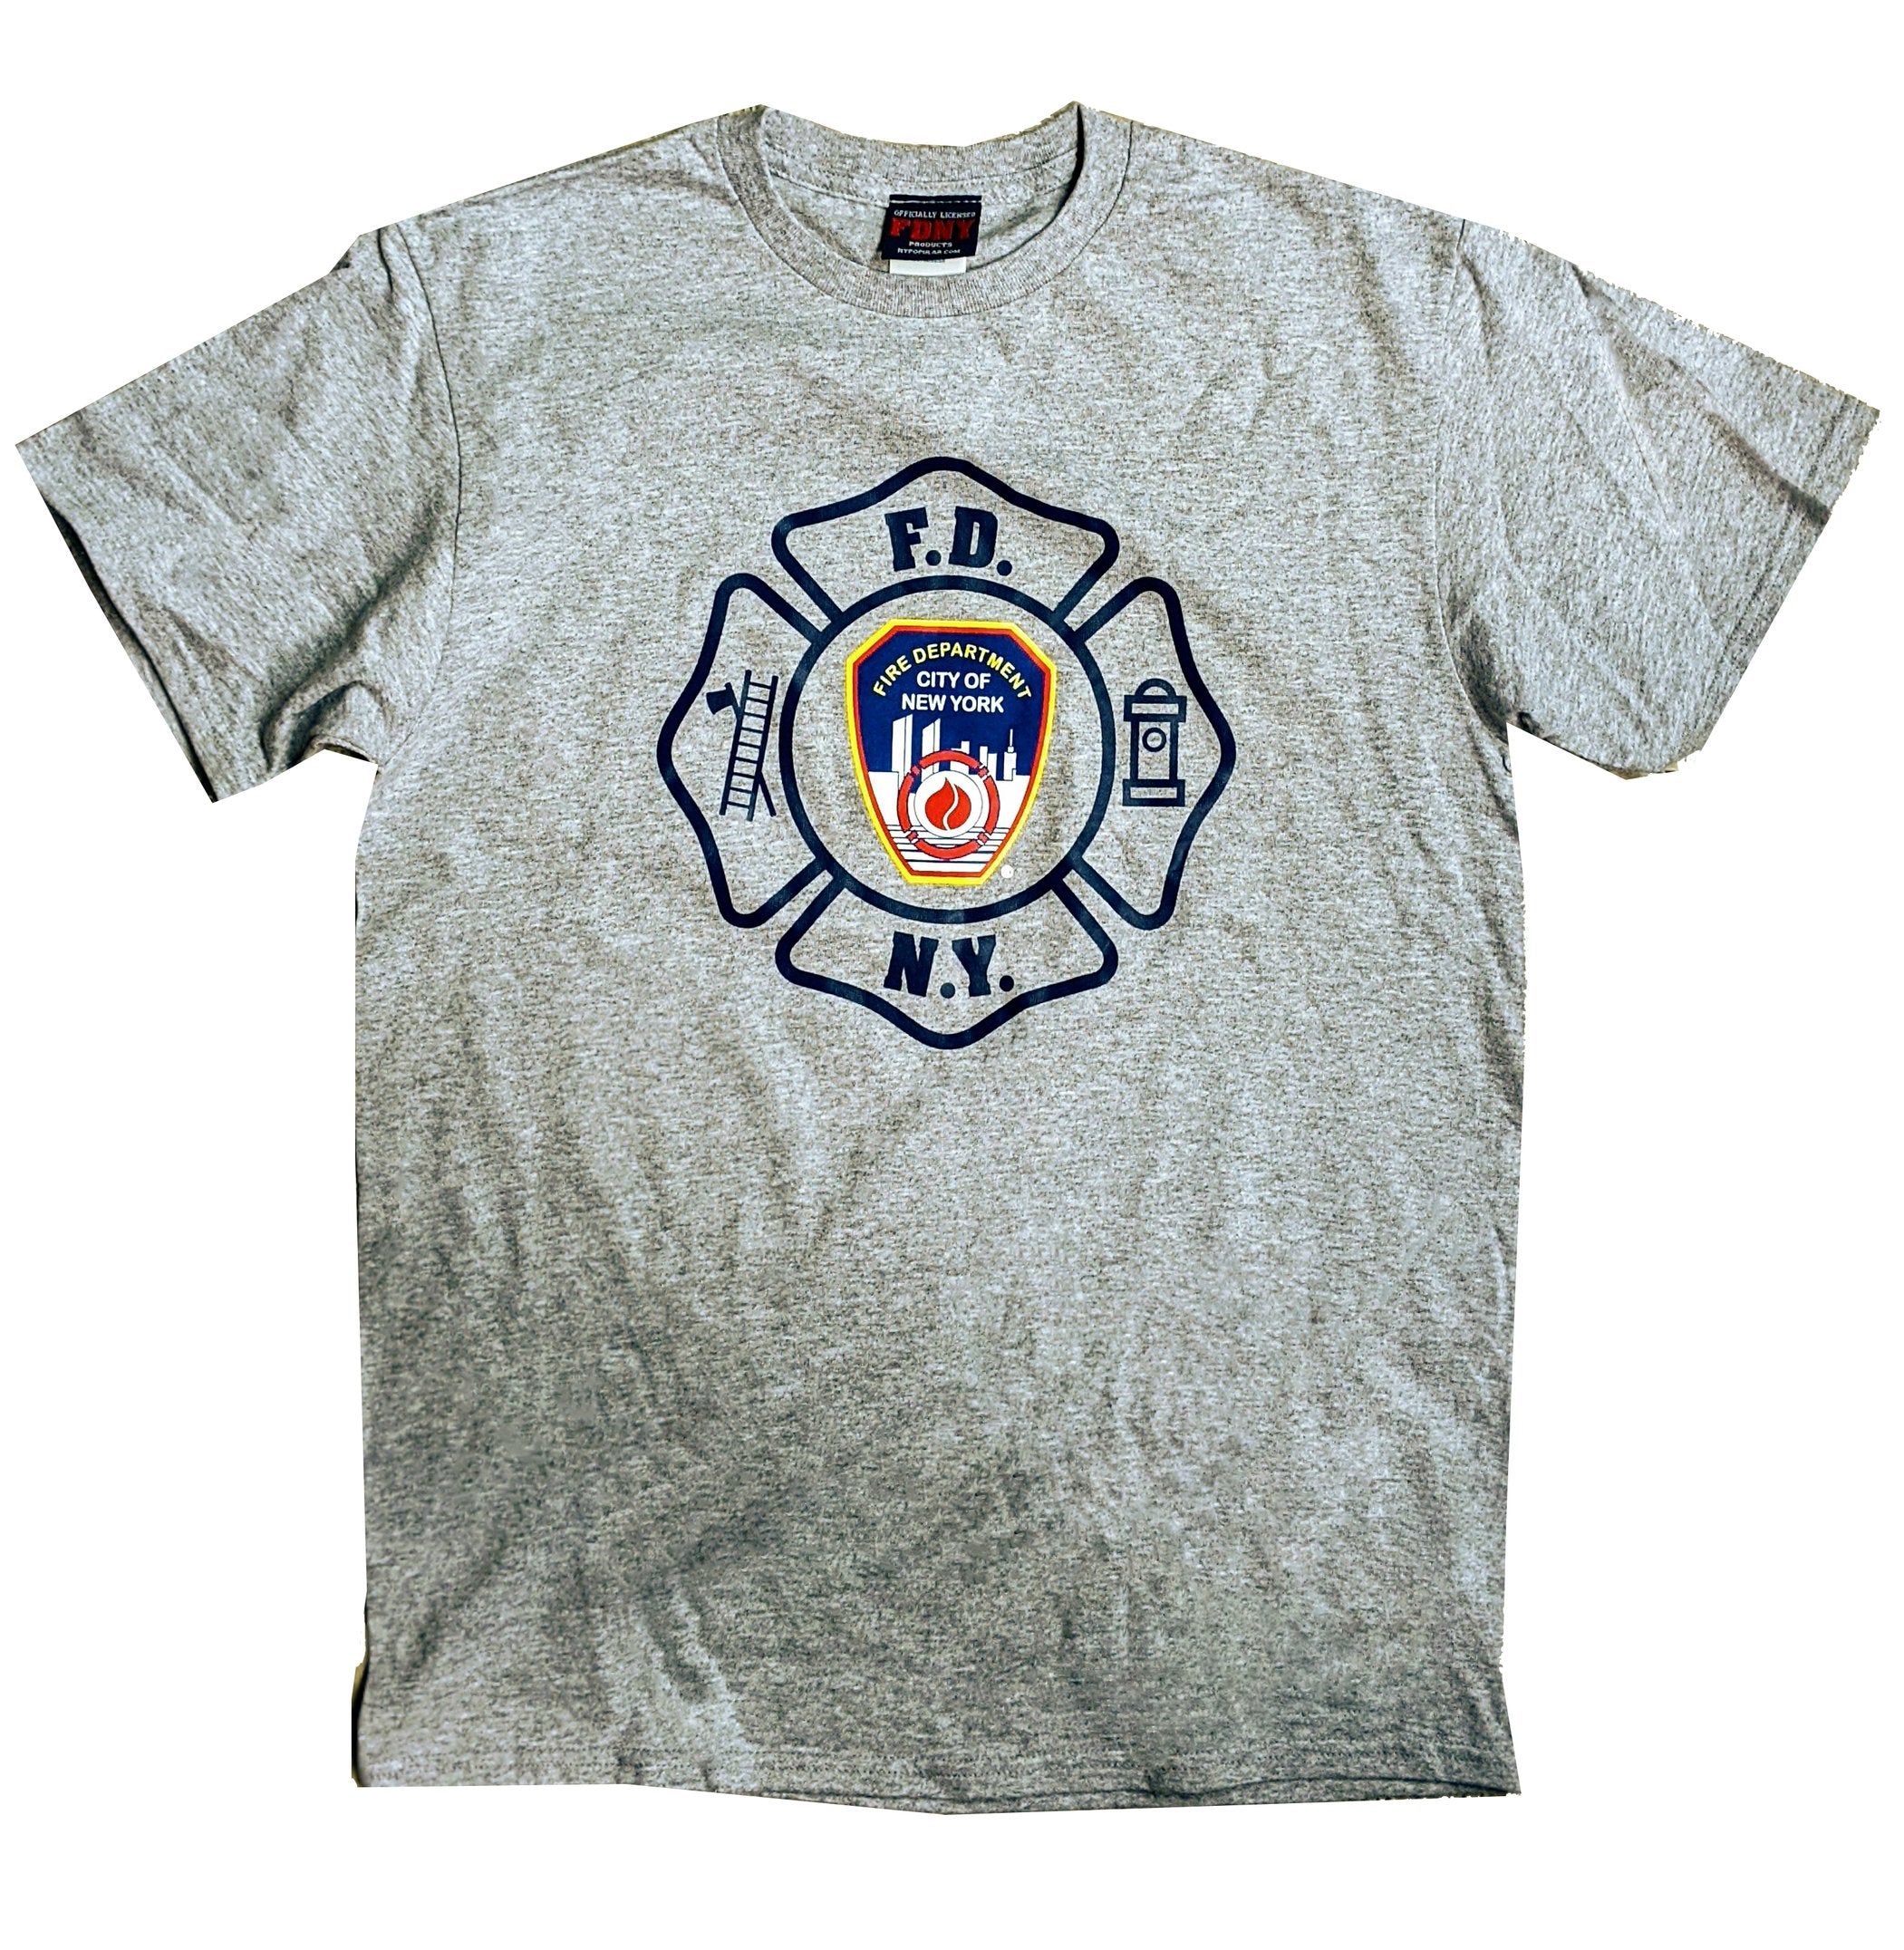 FDNY Mens T-Shirt Heather Gray Tee Shirt Officially Licensed